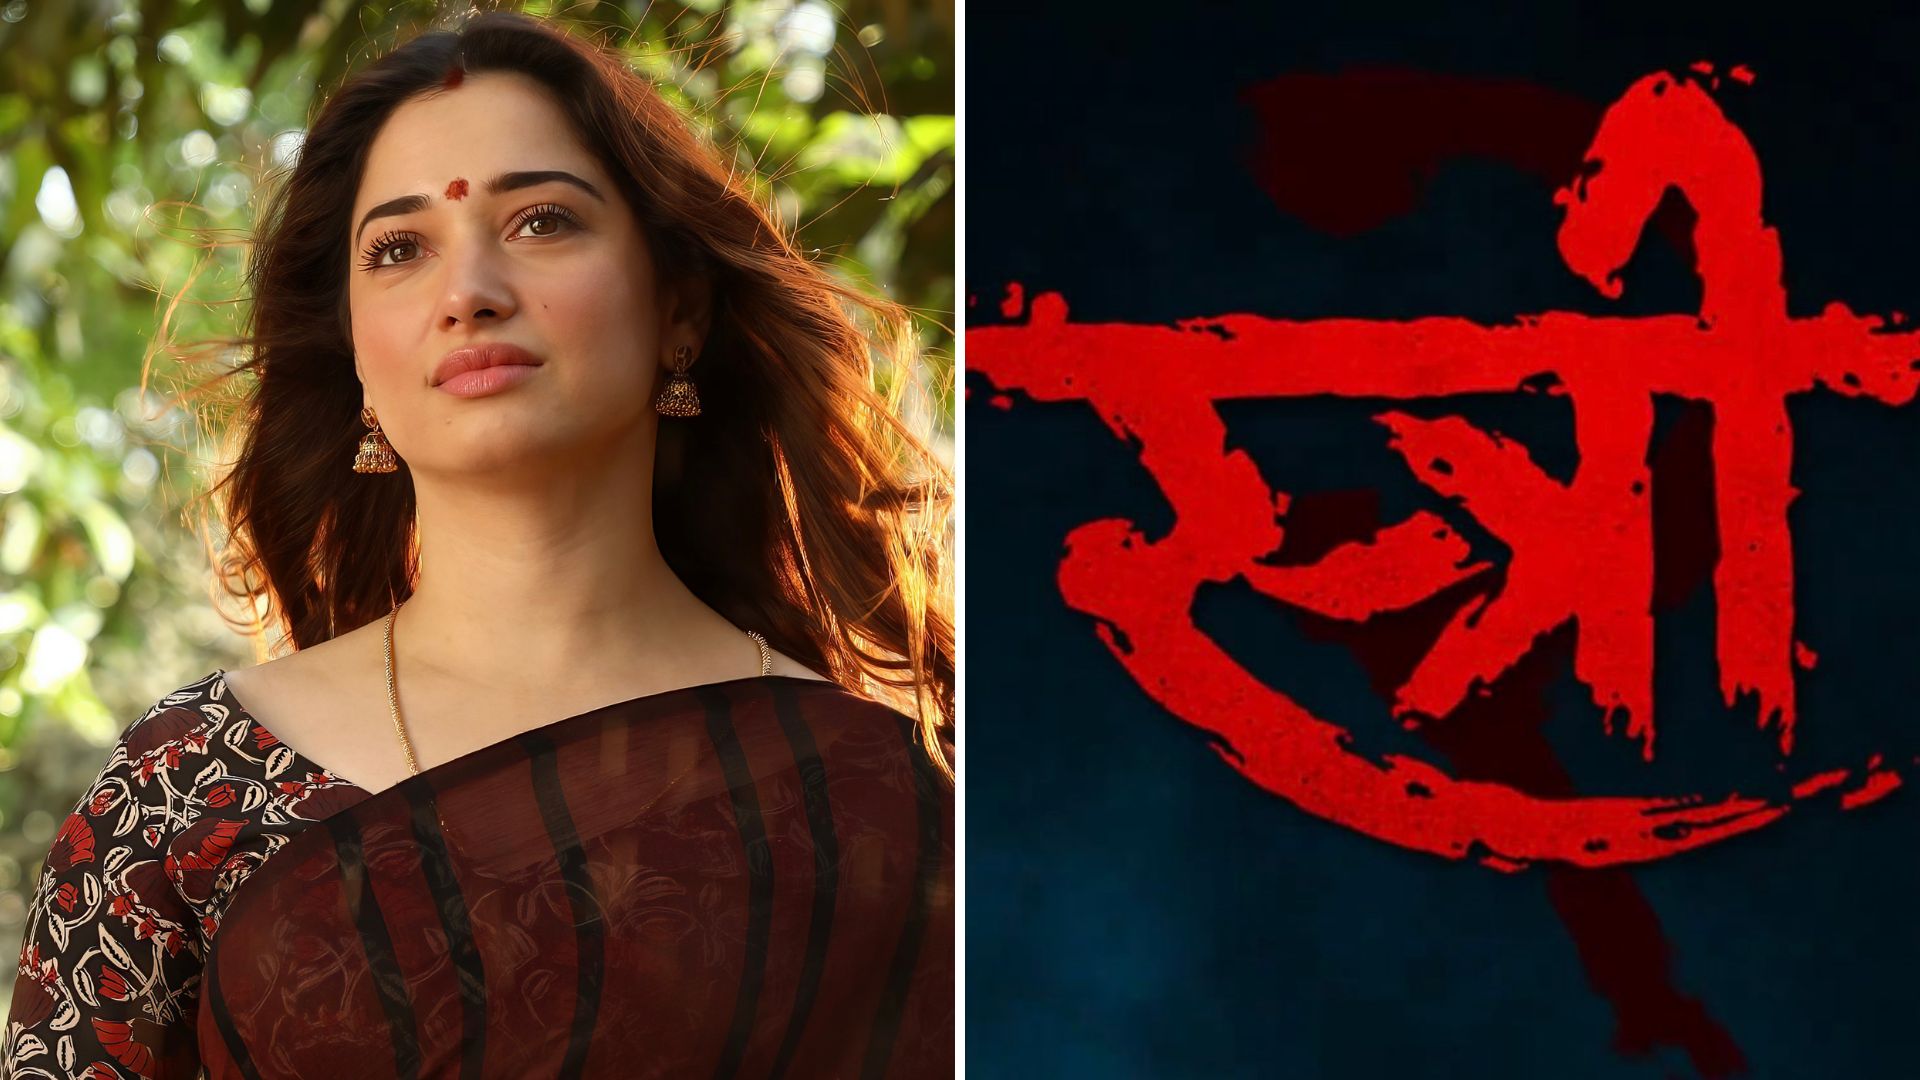 Stree 2 will feature a special cameo appearance by Tamannaah Bhatia